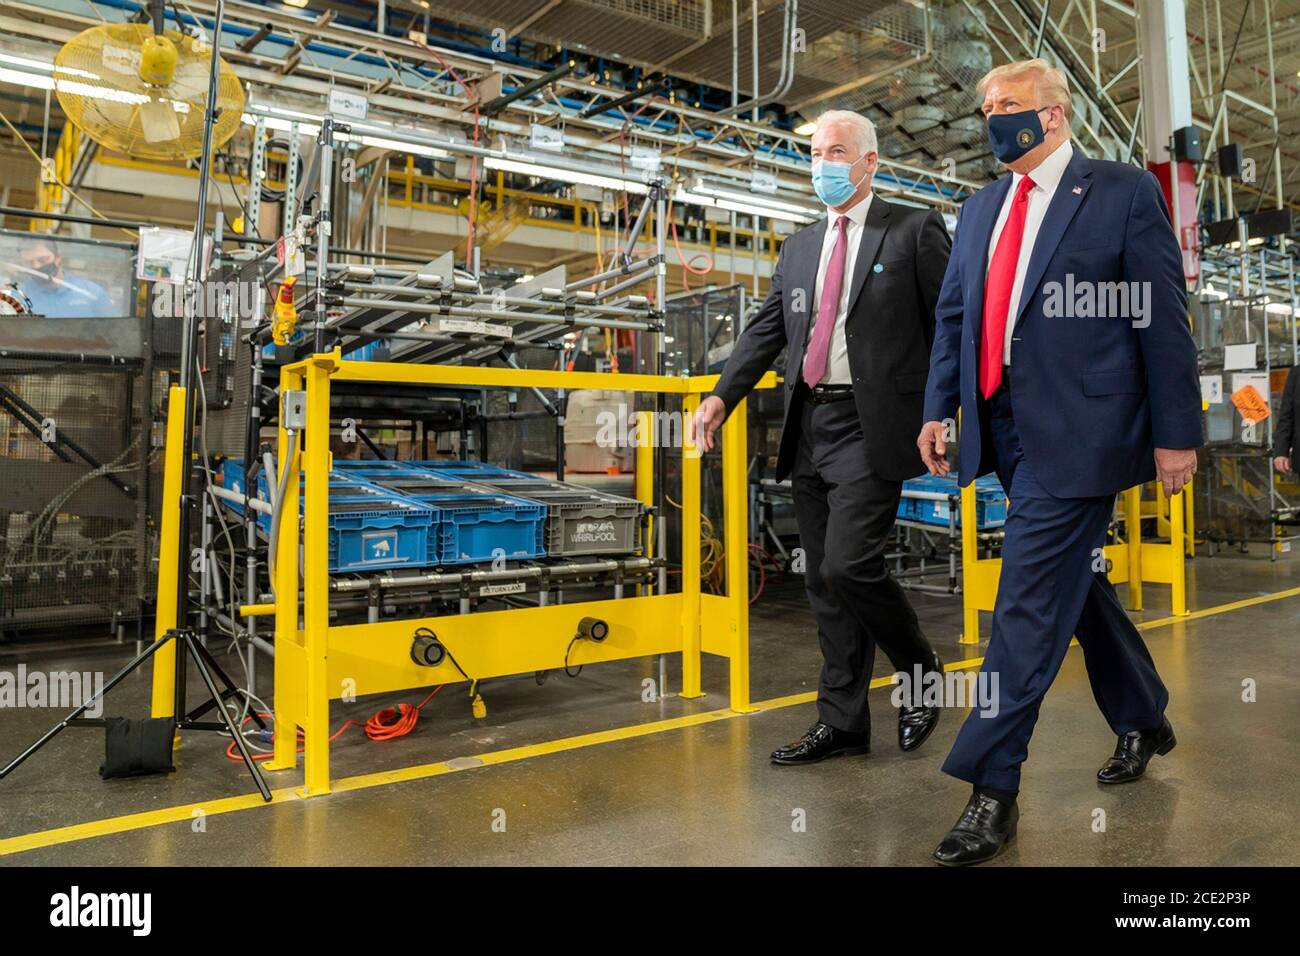 U.S. President Donald Trump, wearing a face mask, is given a tour of a Whirlpool Corporation Manufacturing Plant by VP Integrated Supply Chain and Quality Jim Keppler, left, August 6, 2020 in Clyde, Ohio. Stock Photo